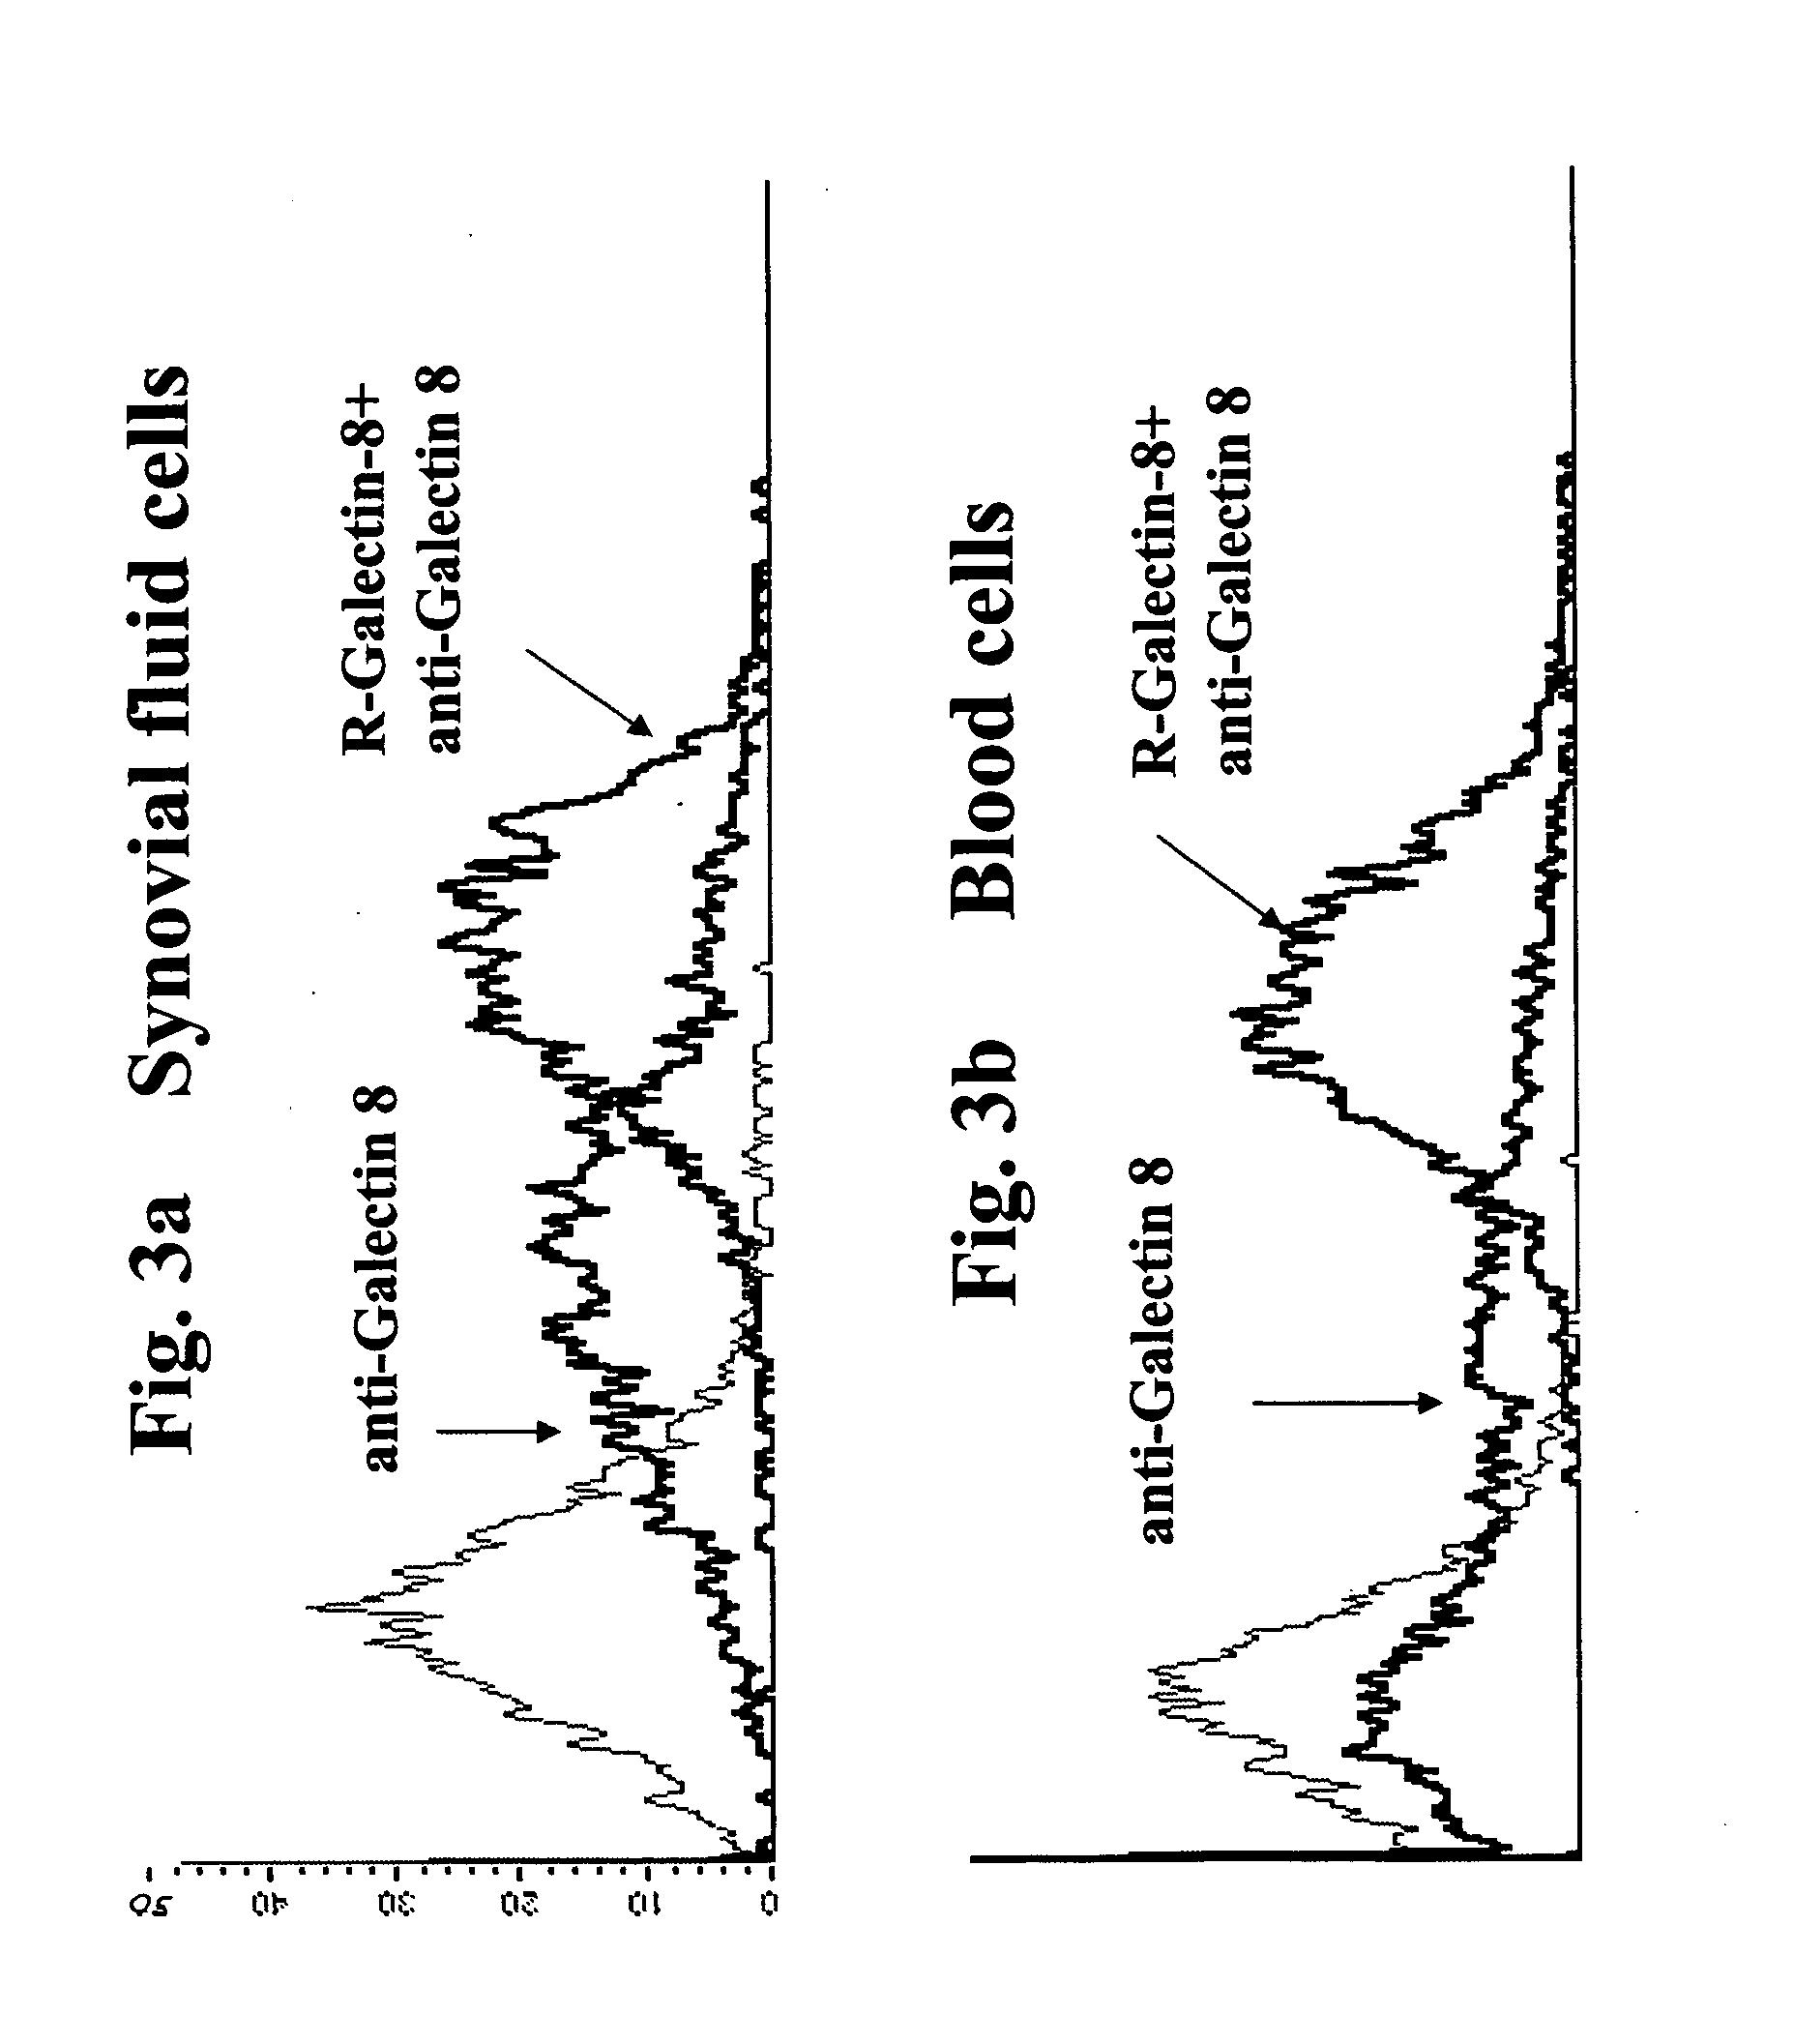 Novel galectin sequences and compositions and methods utilizing same for treating or diagnosing arthritis and other chronic inflammatory diseases